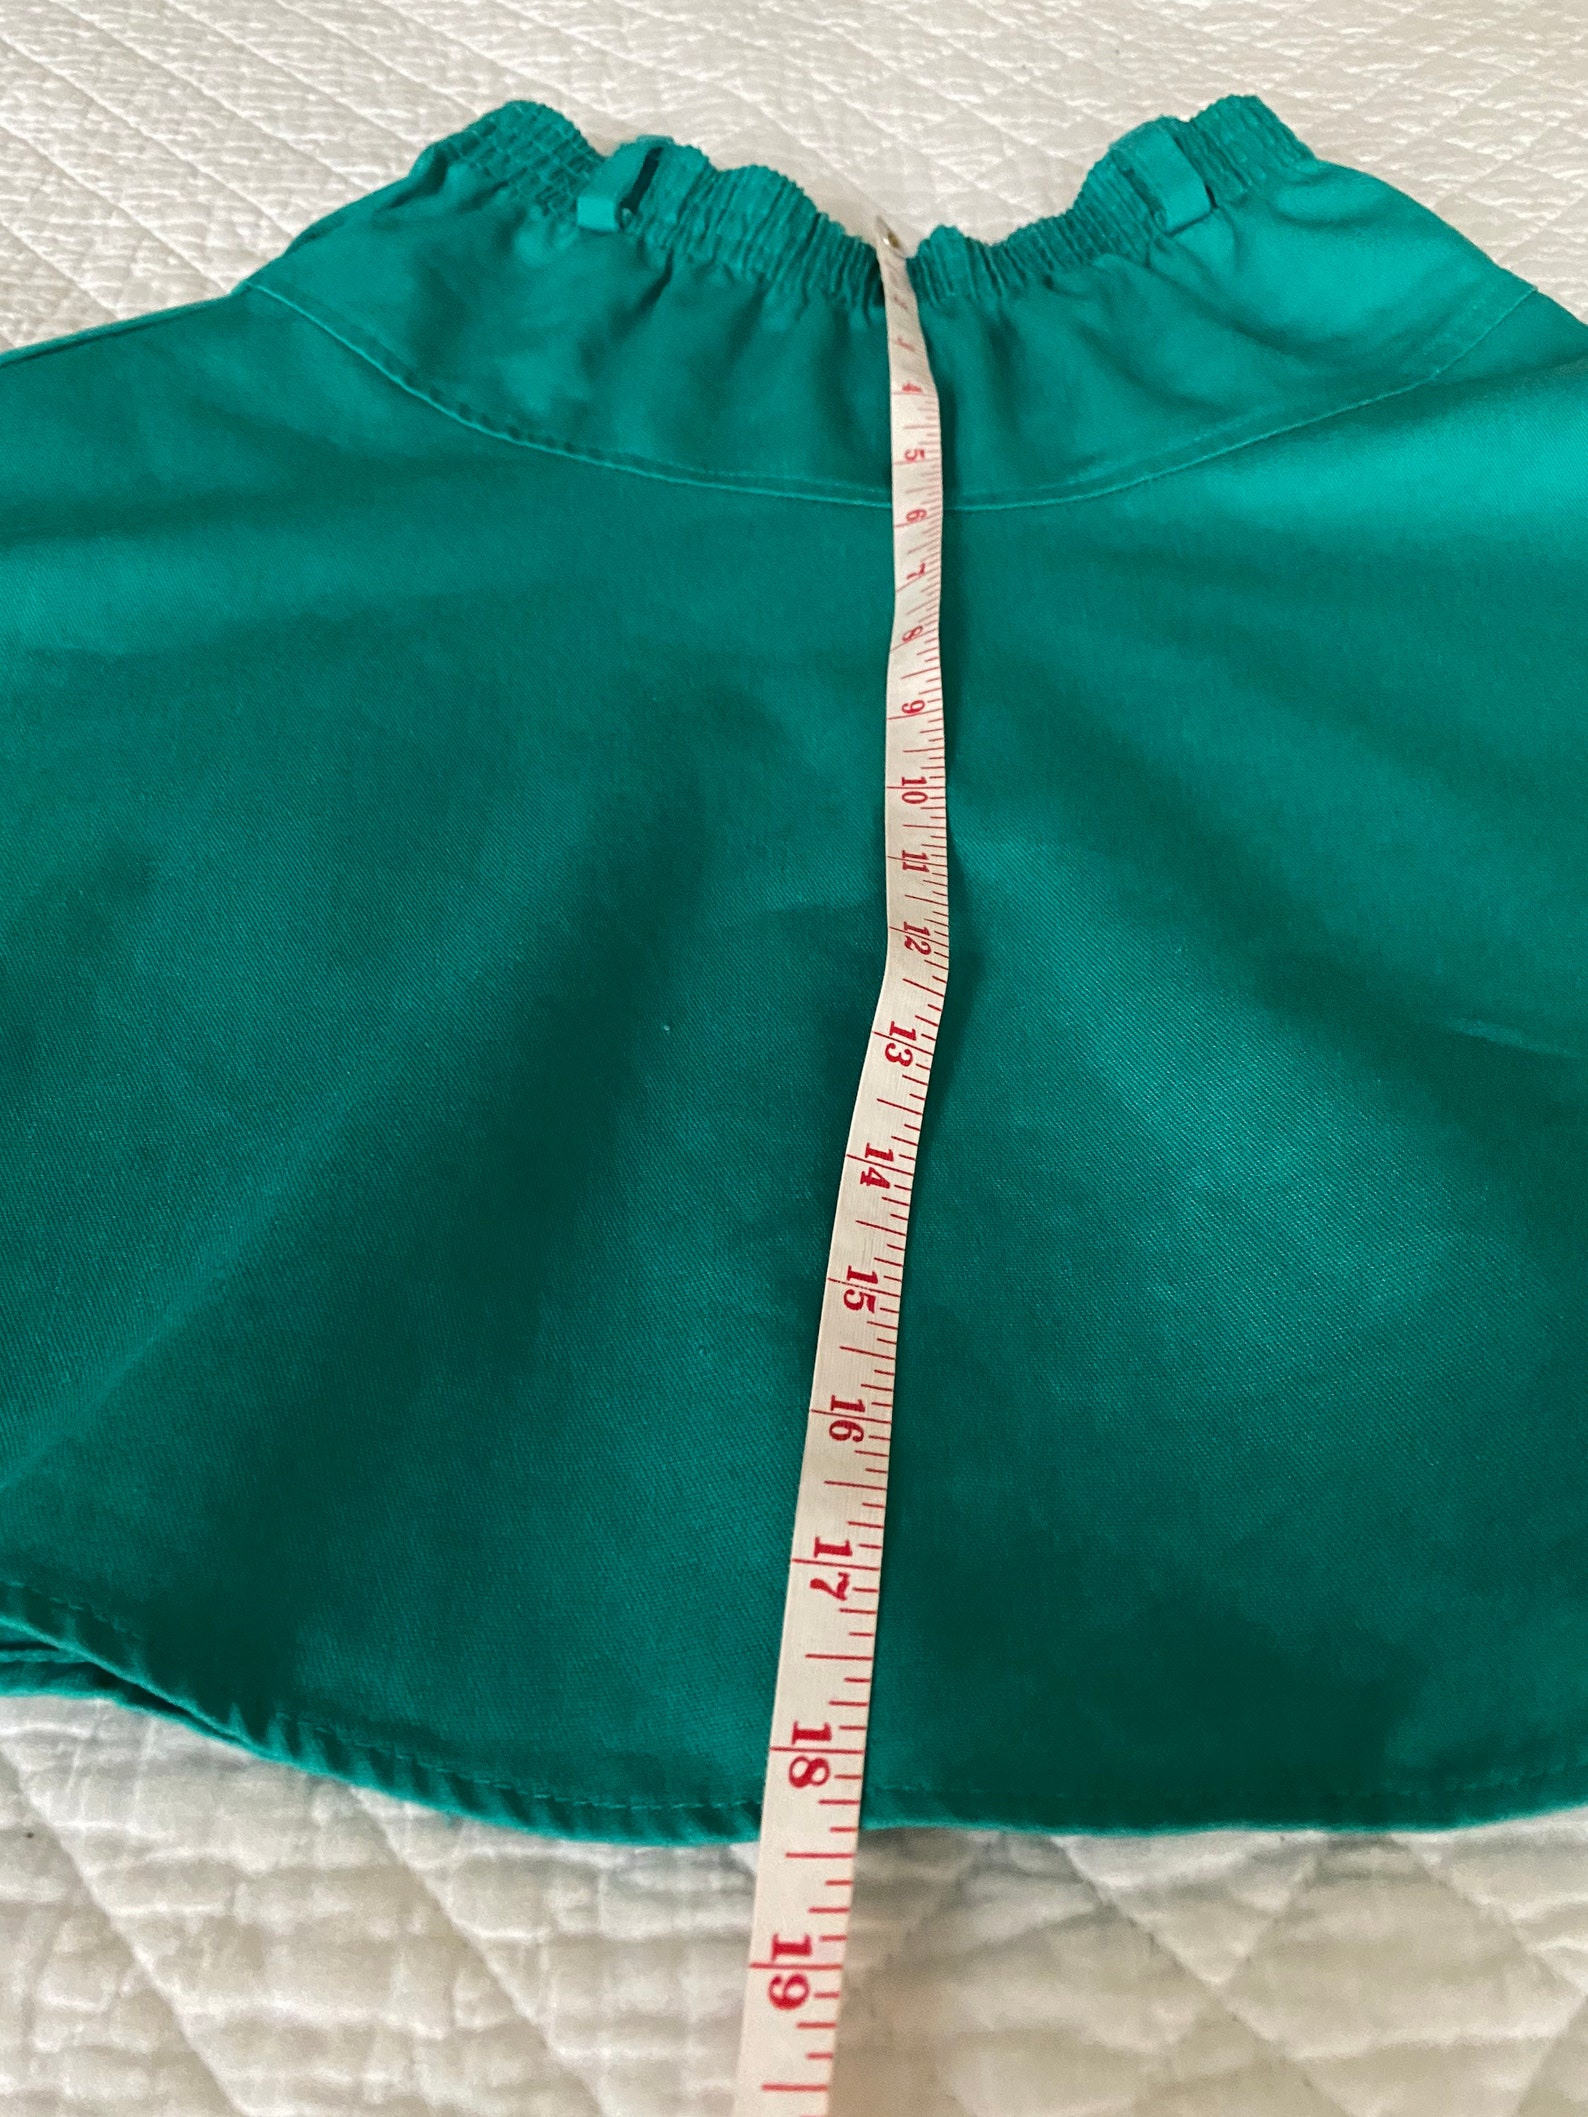 Used Girl Scouts Skirt XS / 90s girl scouts uniform extra | Etsy